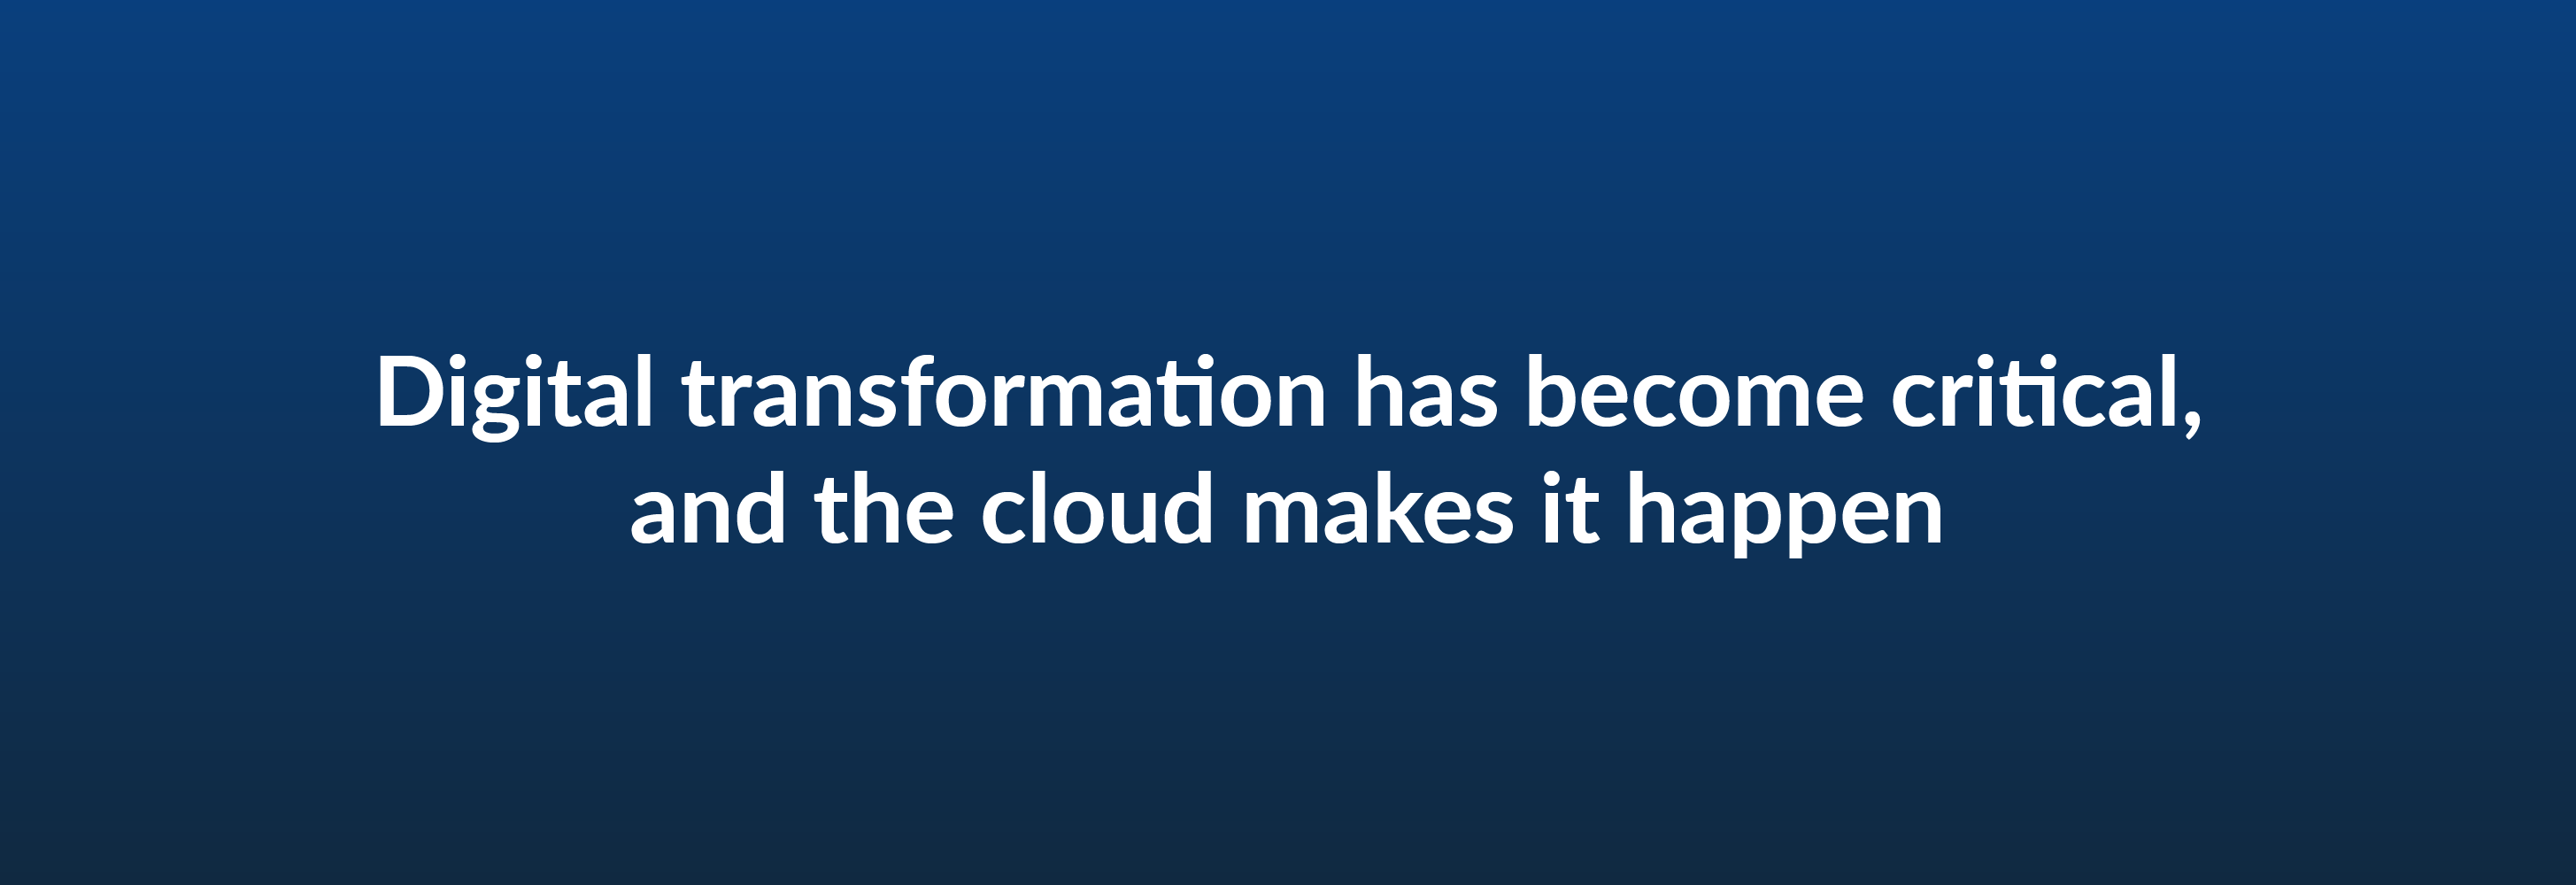 Digital transformation has become critical, and the cloud makes it happen